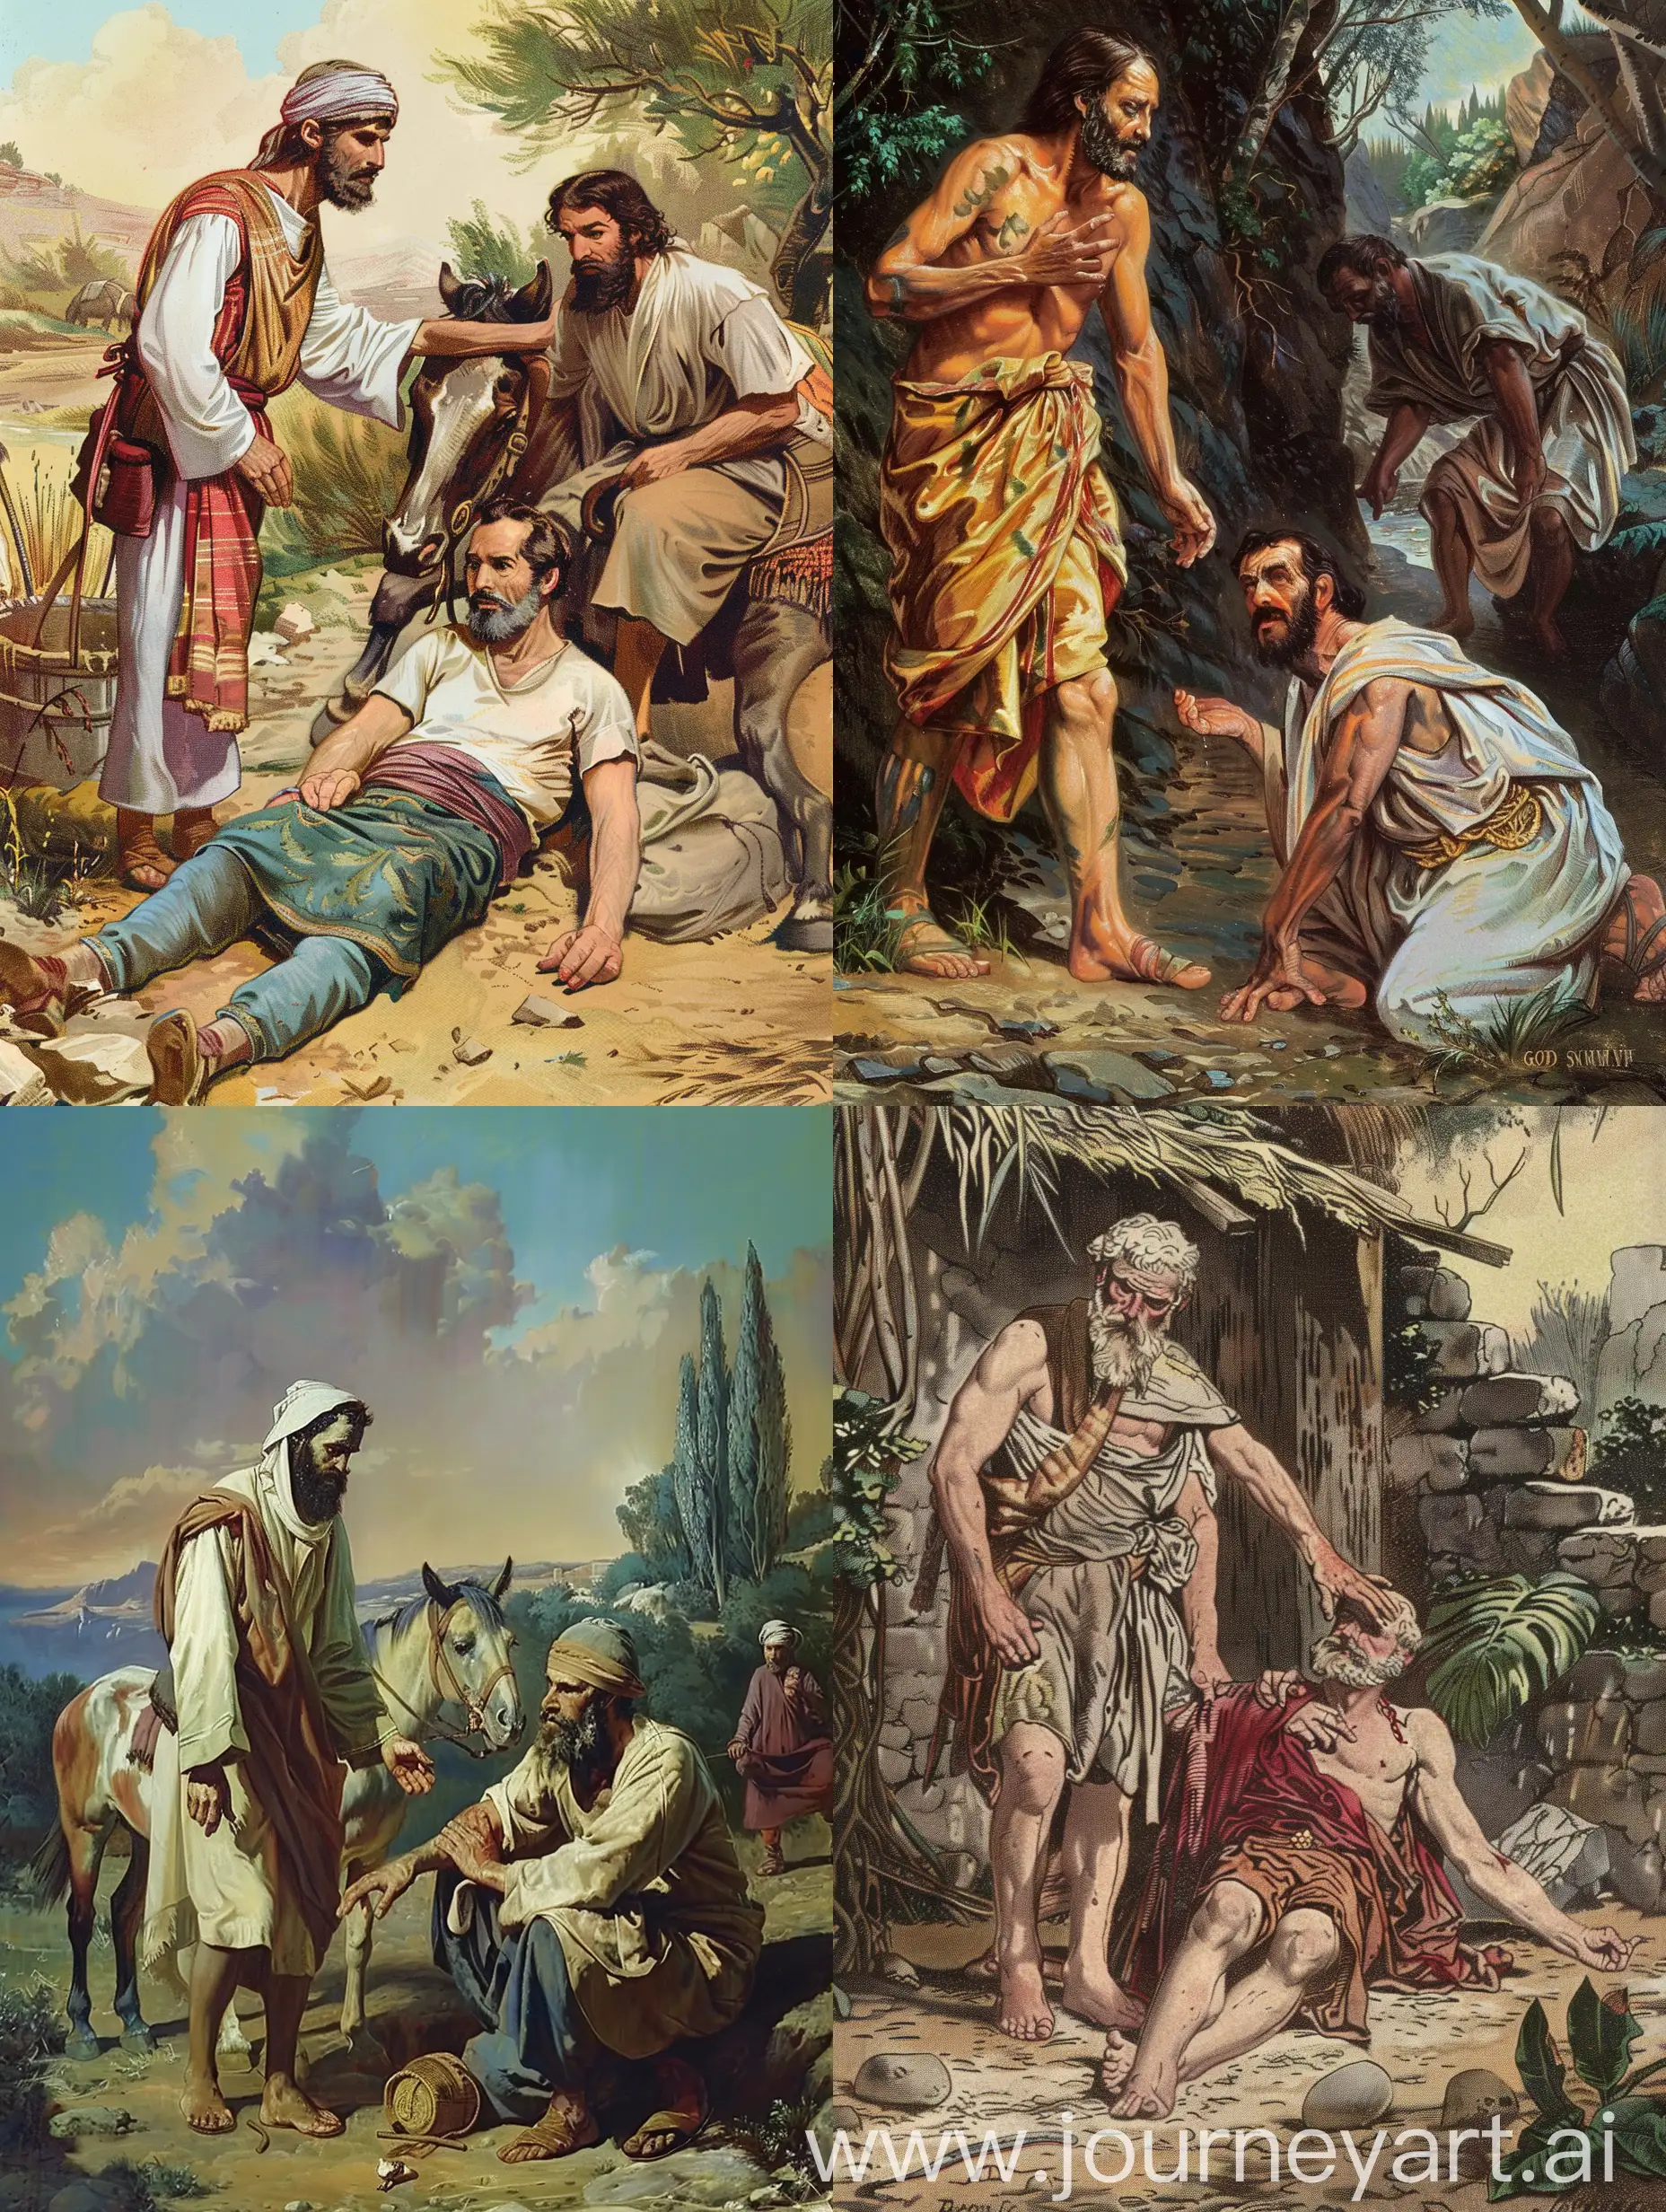 Illustration-of-the-Good-Samaritan-Parable-in-the-Bible